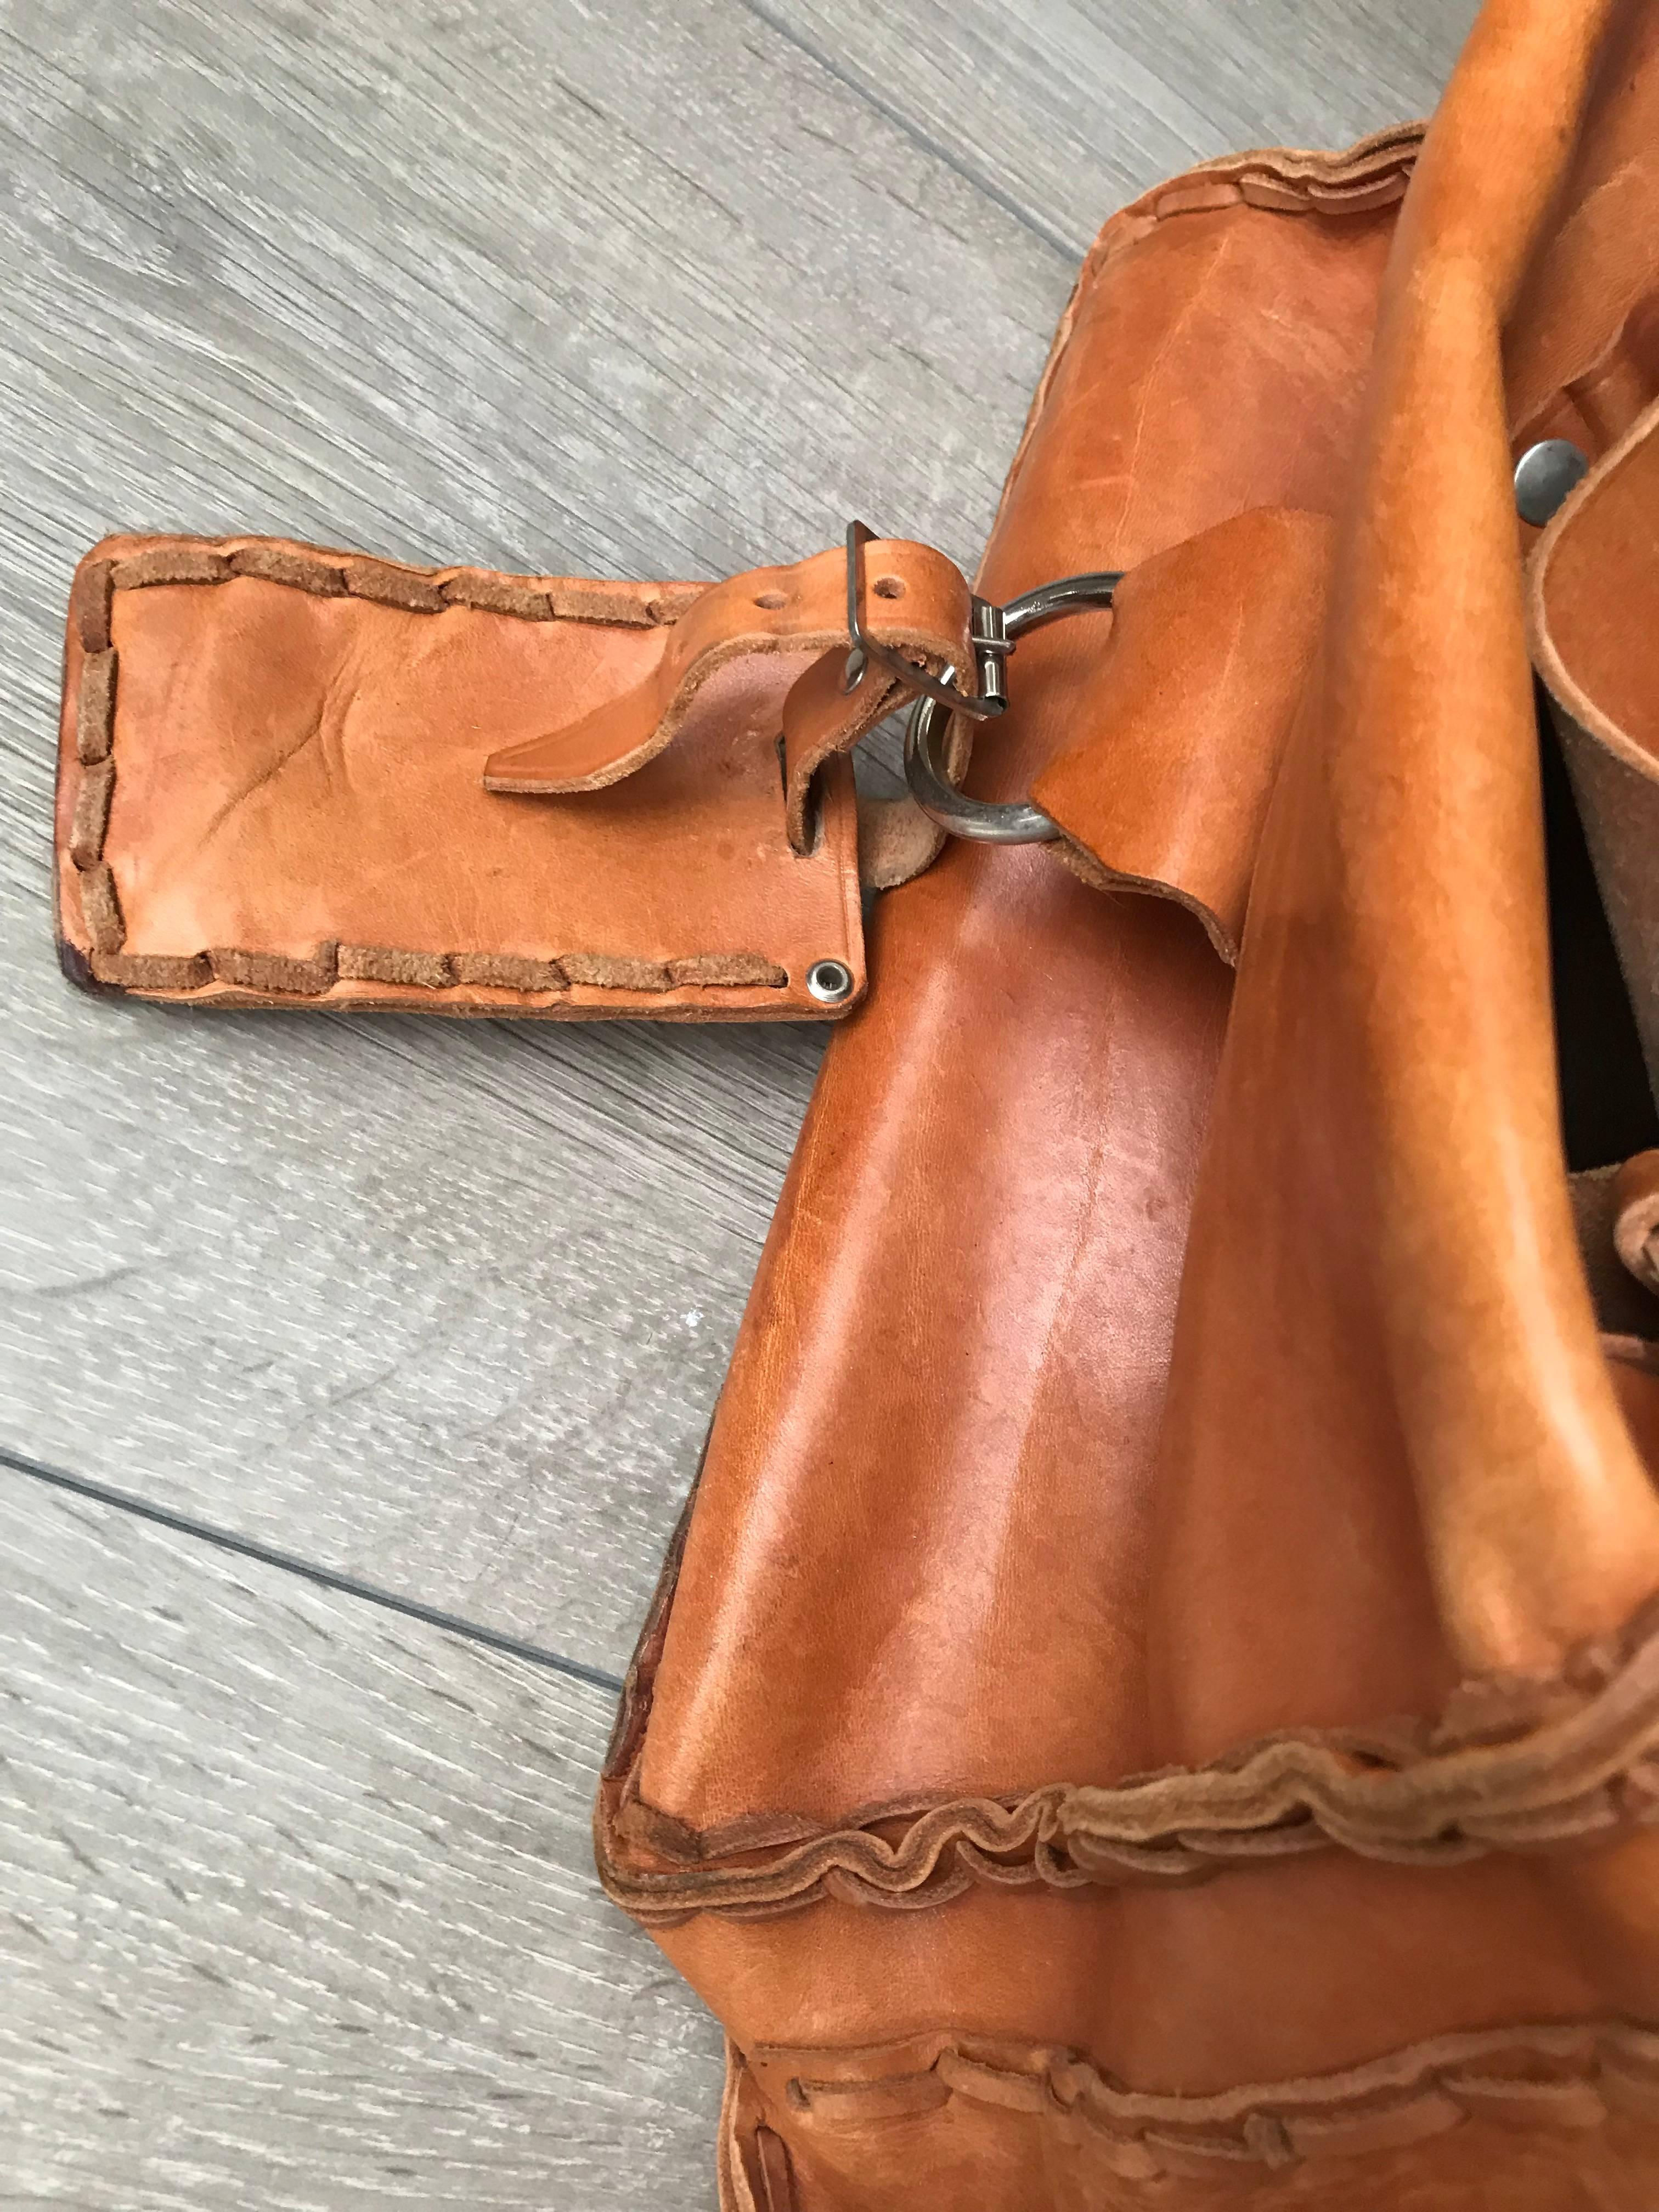 Hand-Crafted Vintage, Handy and Decorative Large Leather Travel Bag or Magazine Bag Stand For Sale